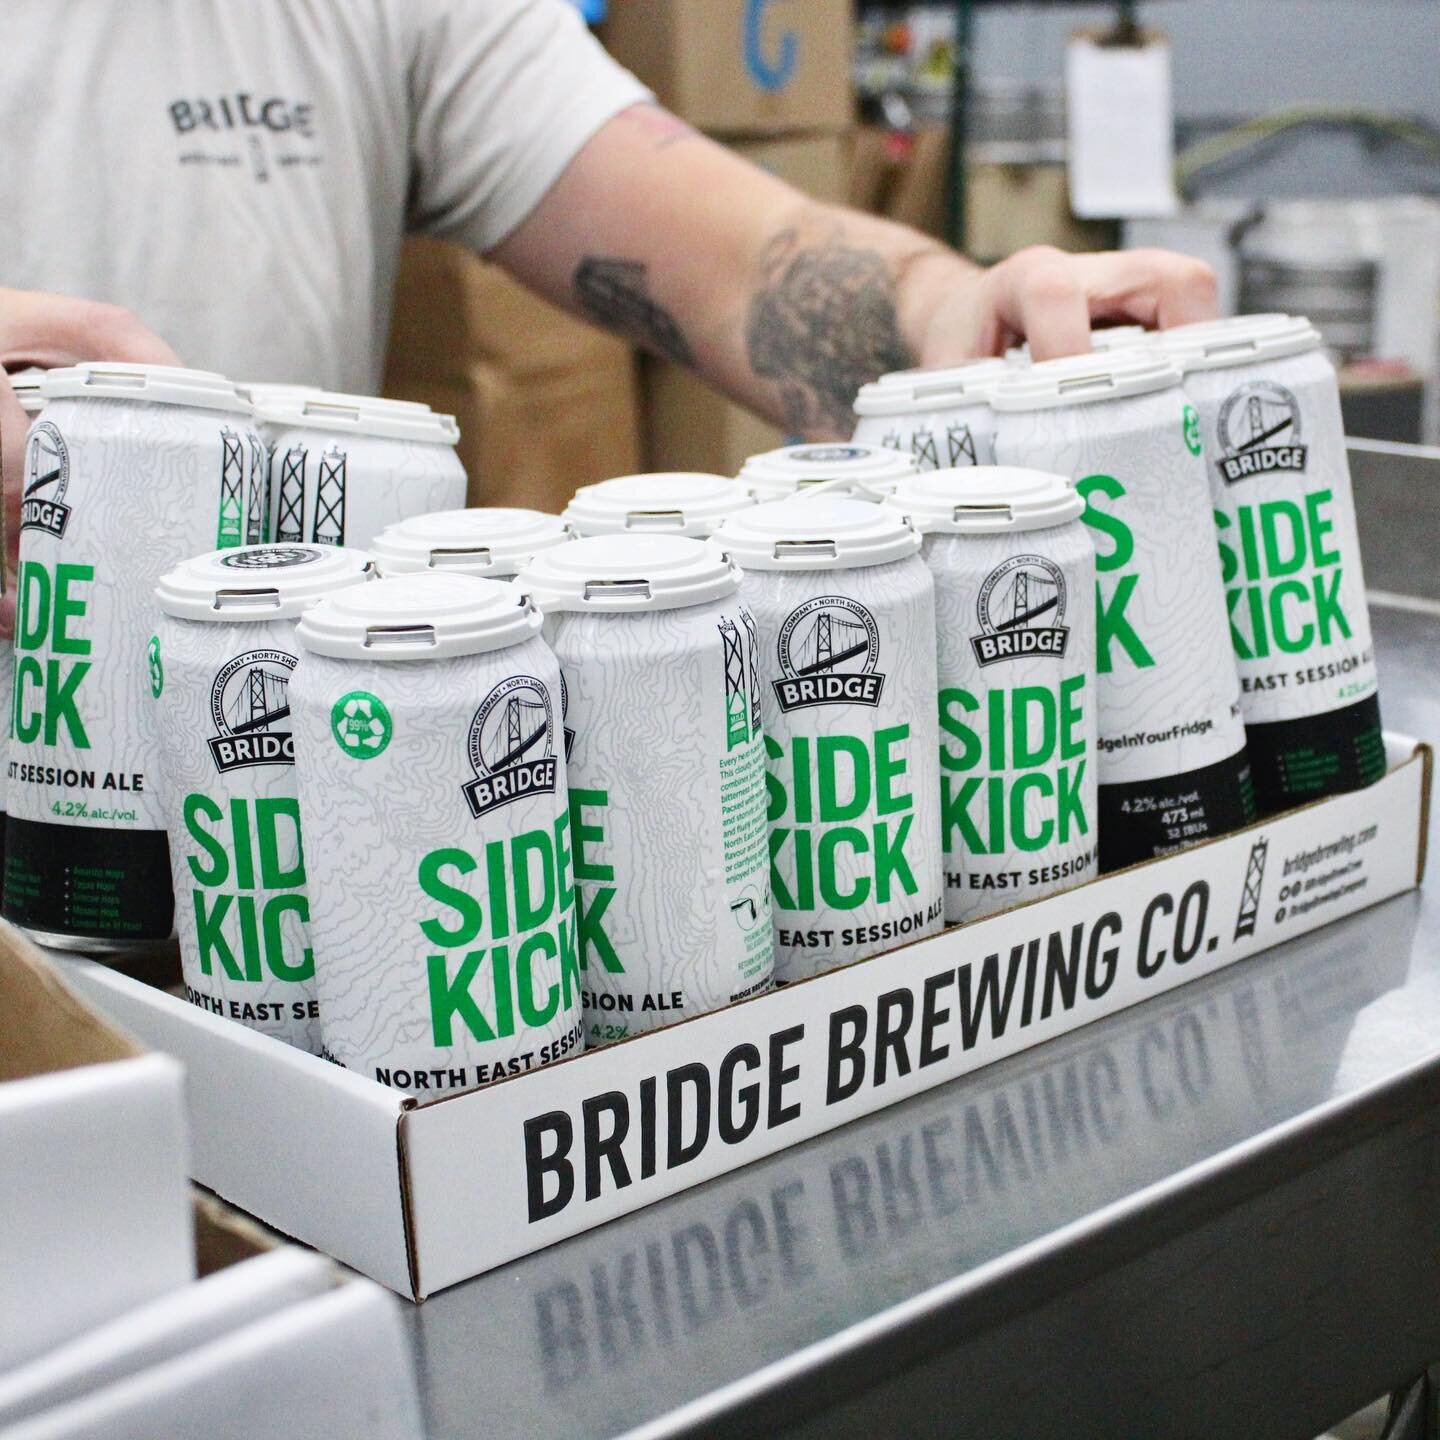 SIDE KICK NE SESSION ALE
4.2% | 32IBU

Our gold medal award winning session ale is back! Side Kick is a more session-able take on Side Cut. We use a very similar malt bill to Side Cut in the recipe, but decrease the strength of the beer to make it mo